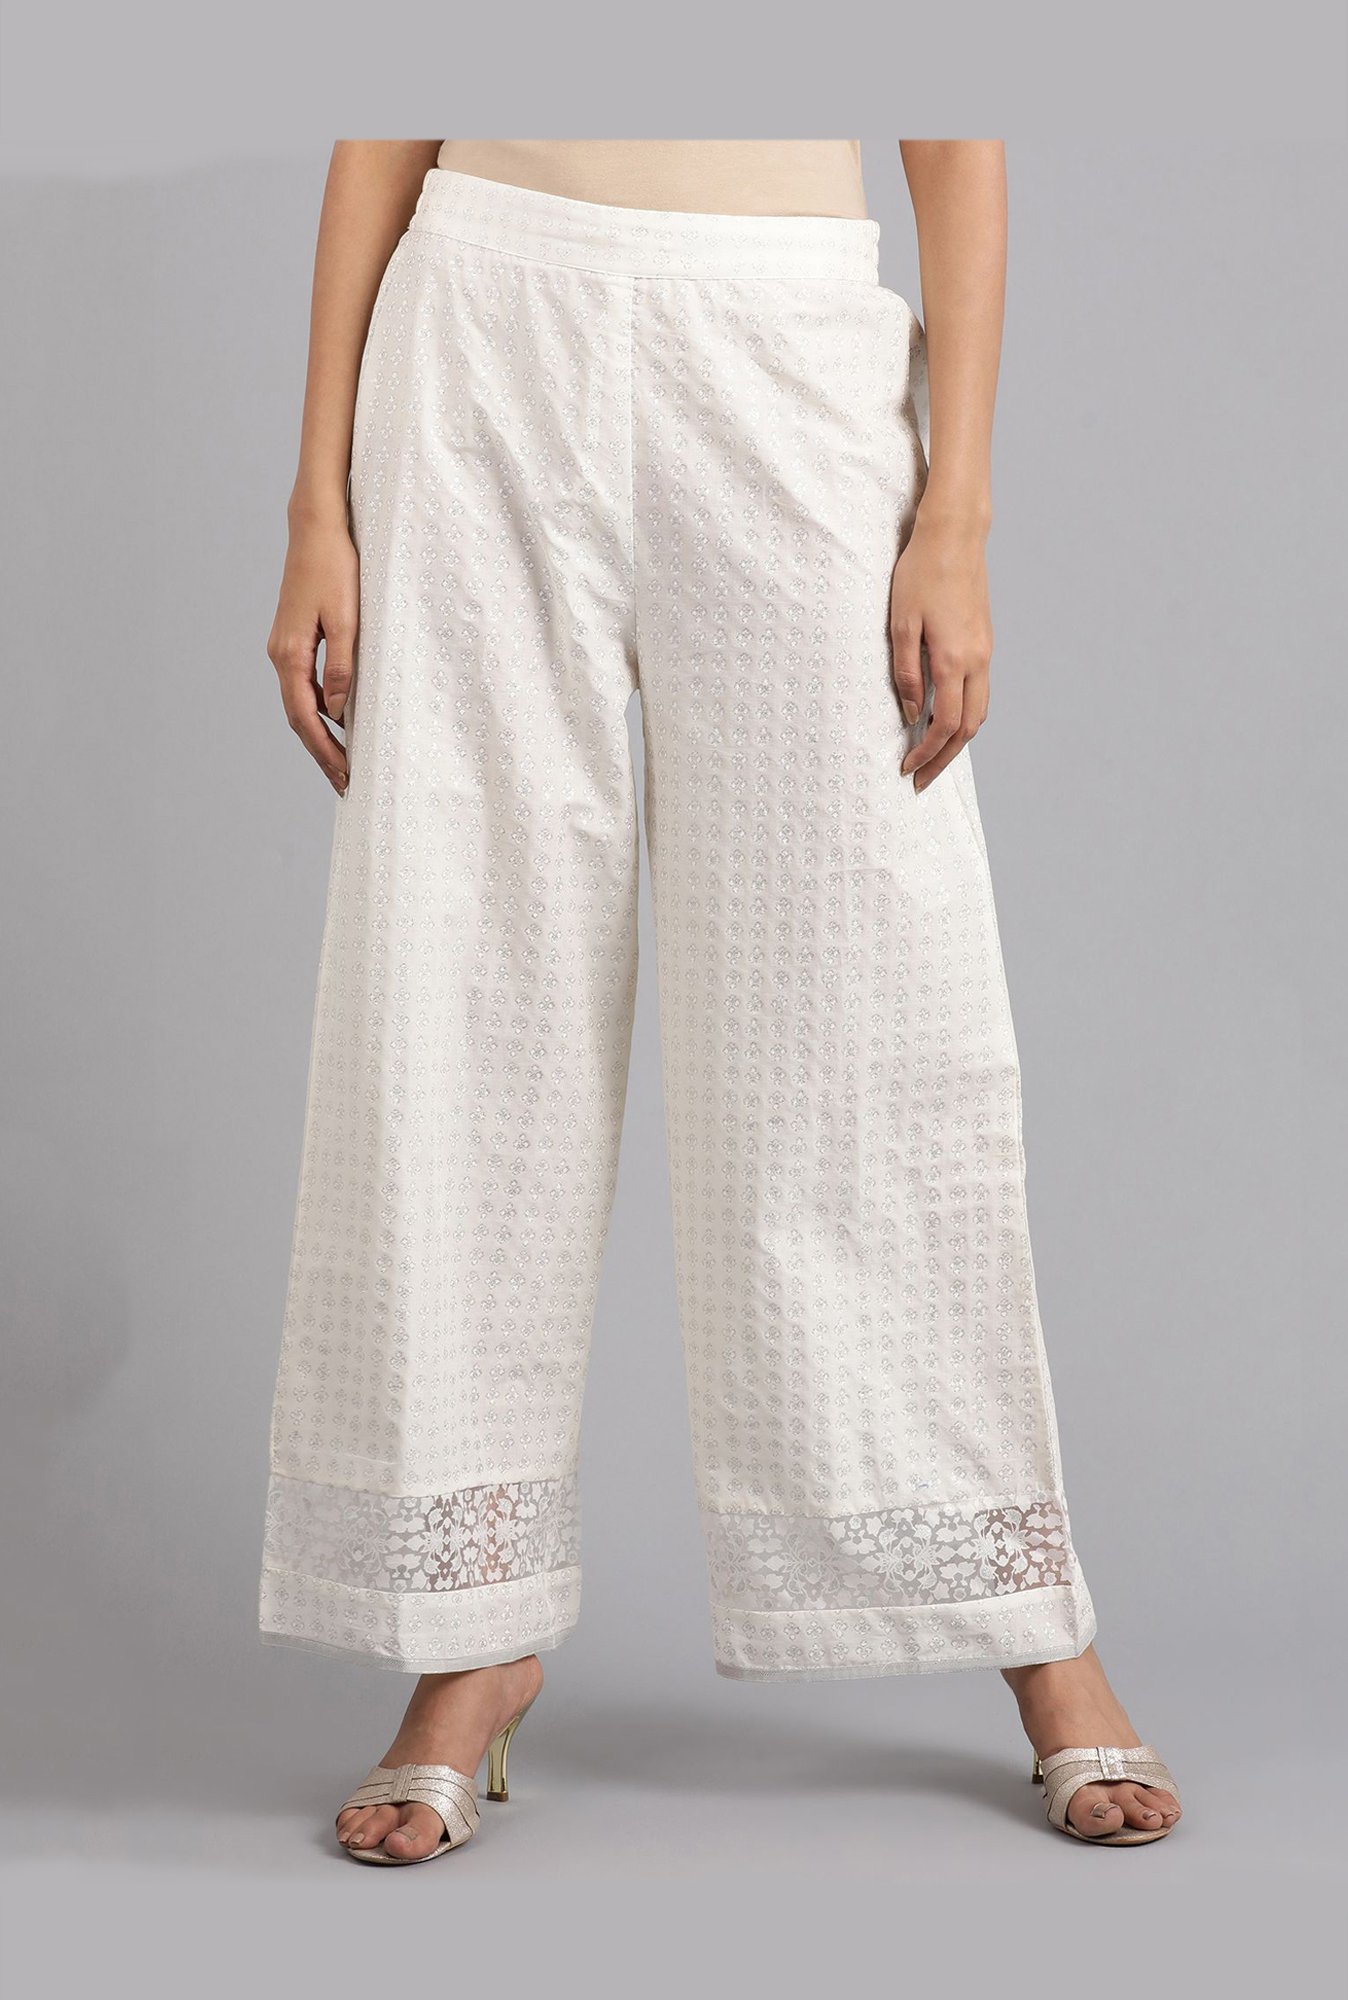 Buy Ecru And Blue Geometric Printed Parallel Pants Online  W for Woman